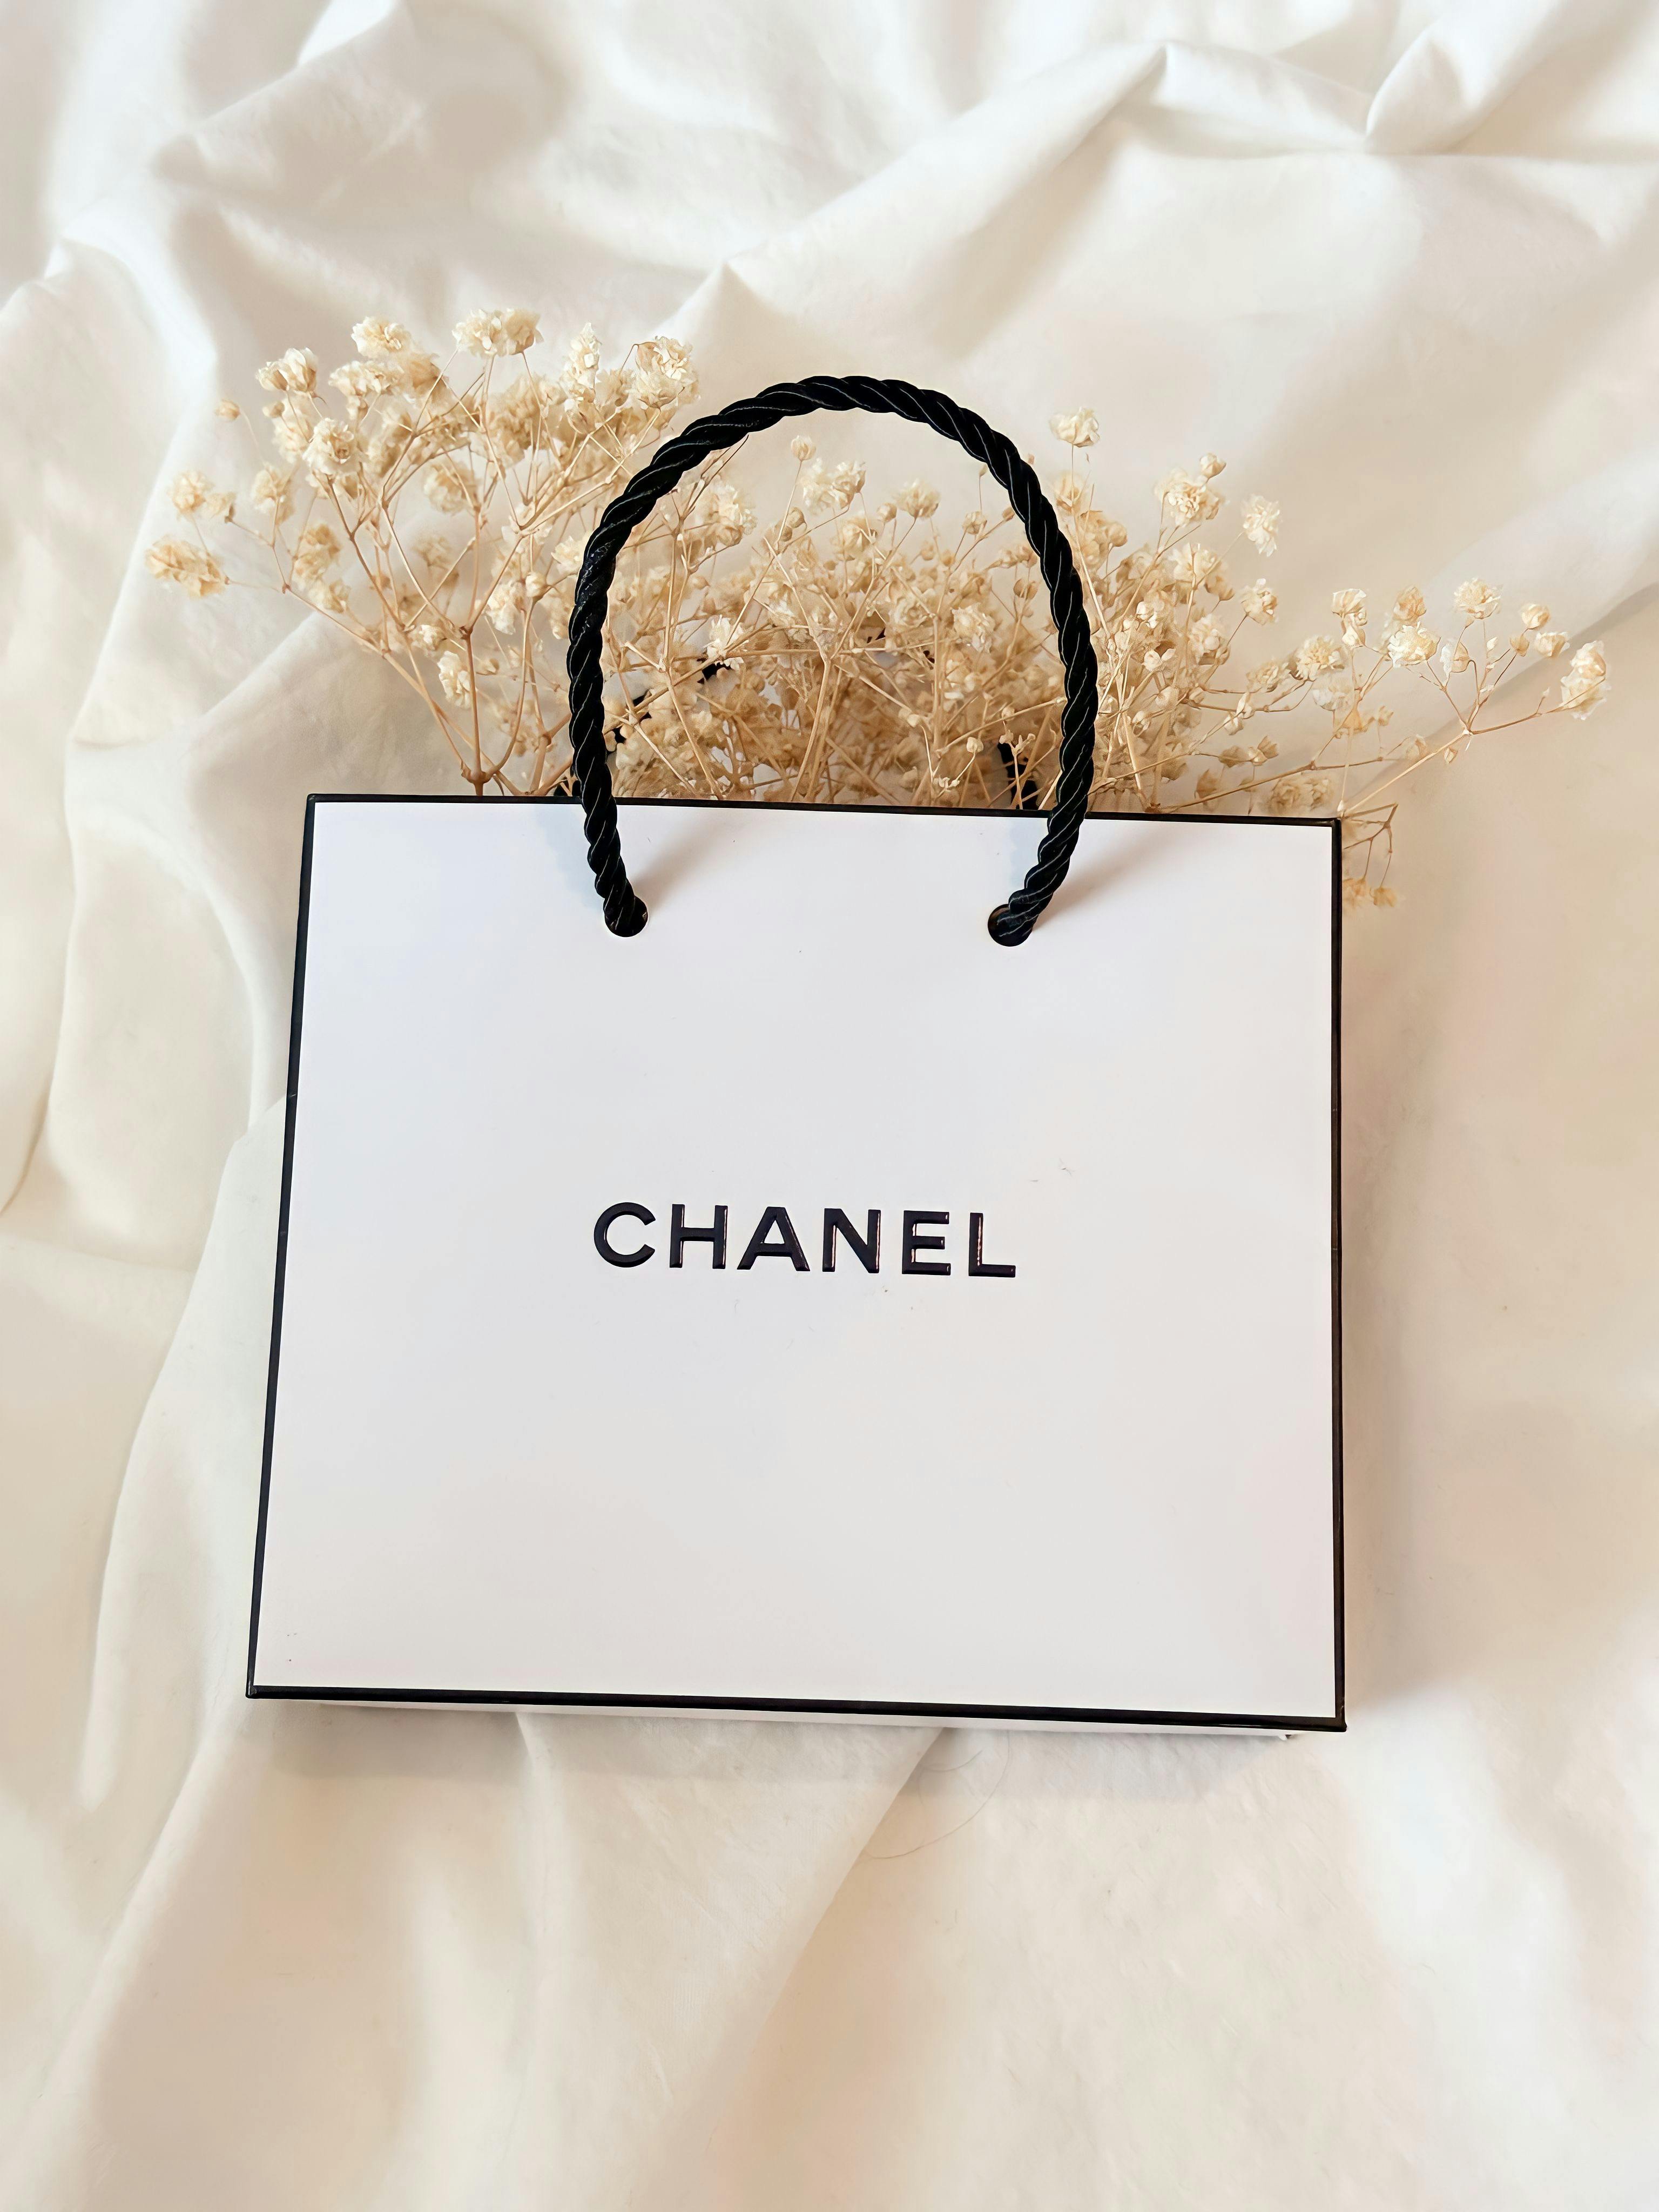 Chanel Bag Photos, Download The BEST Free Chanel Bag Stock Photos